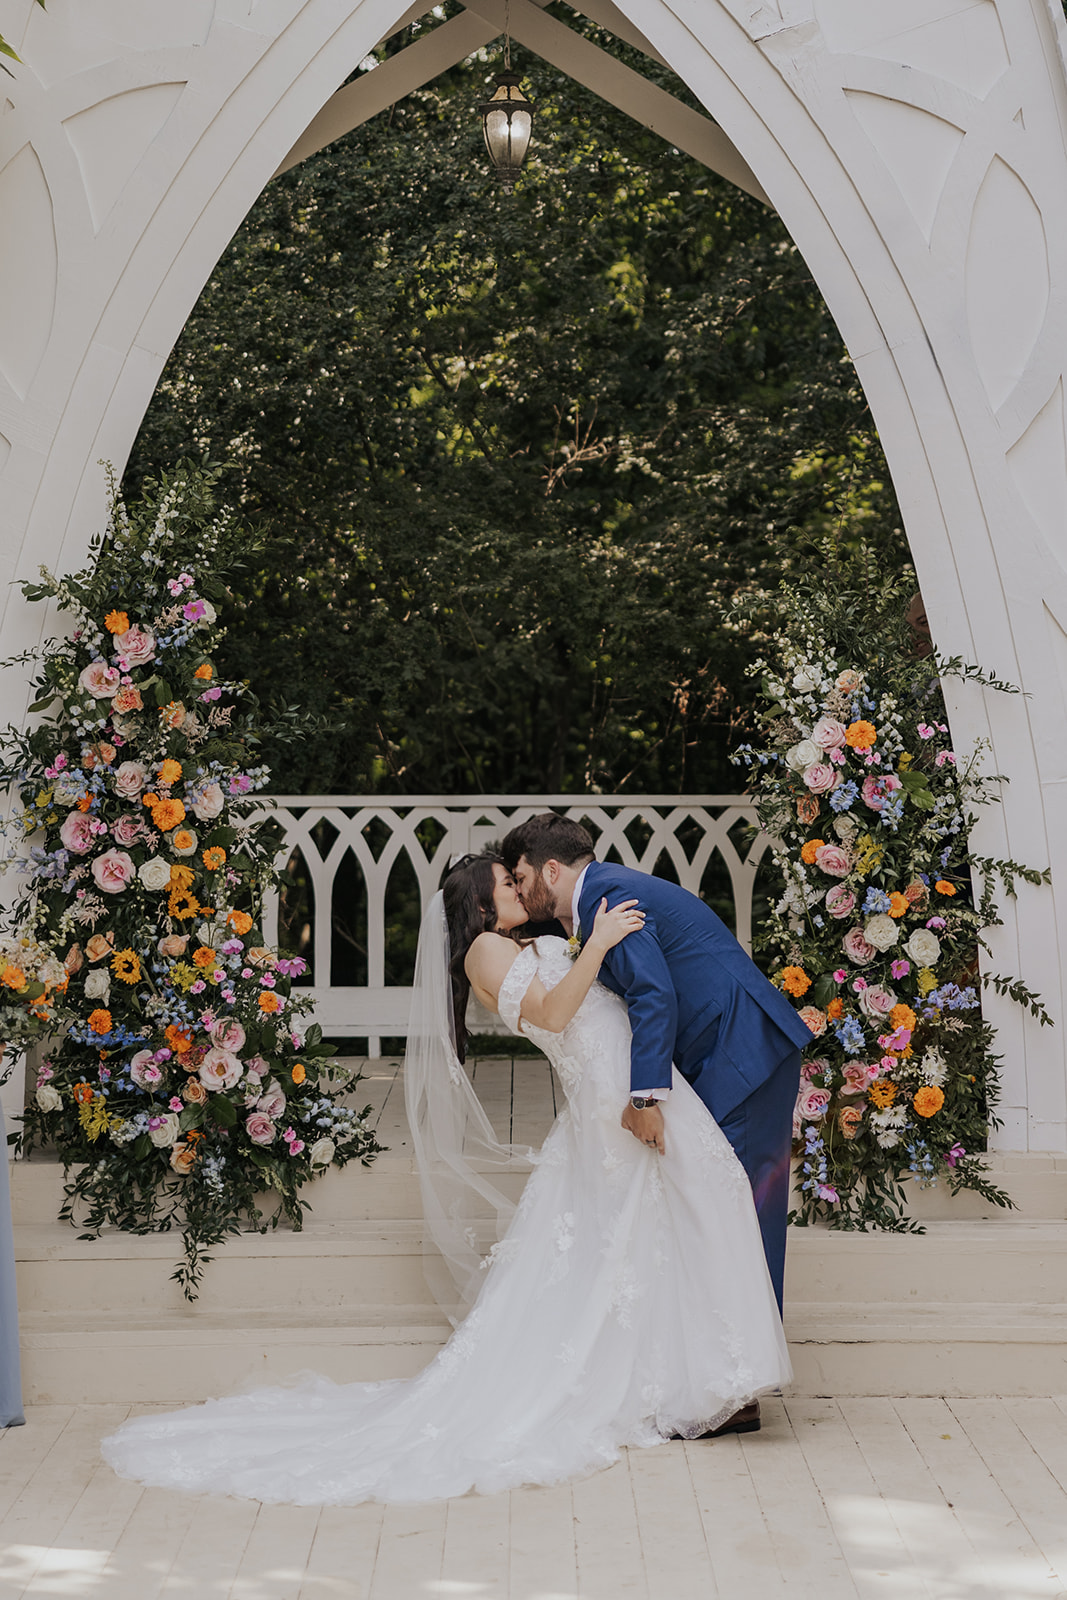 bride and groom share a kiss with their beautiful floral wedding arch in the background